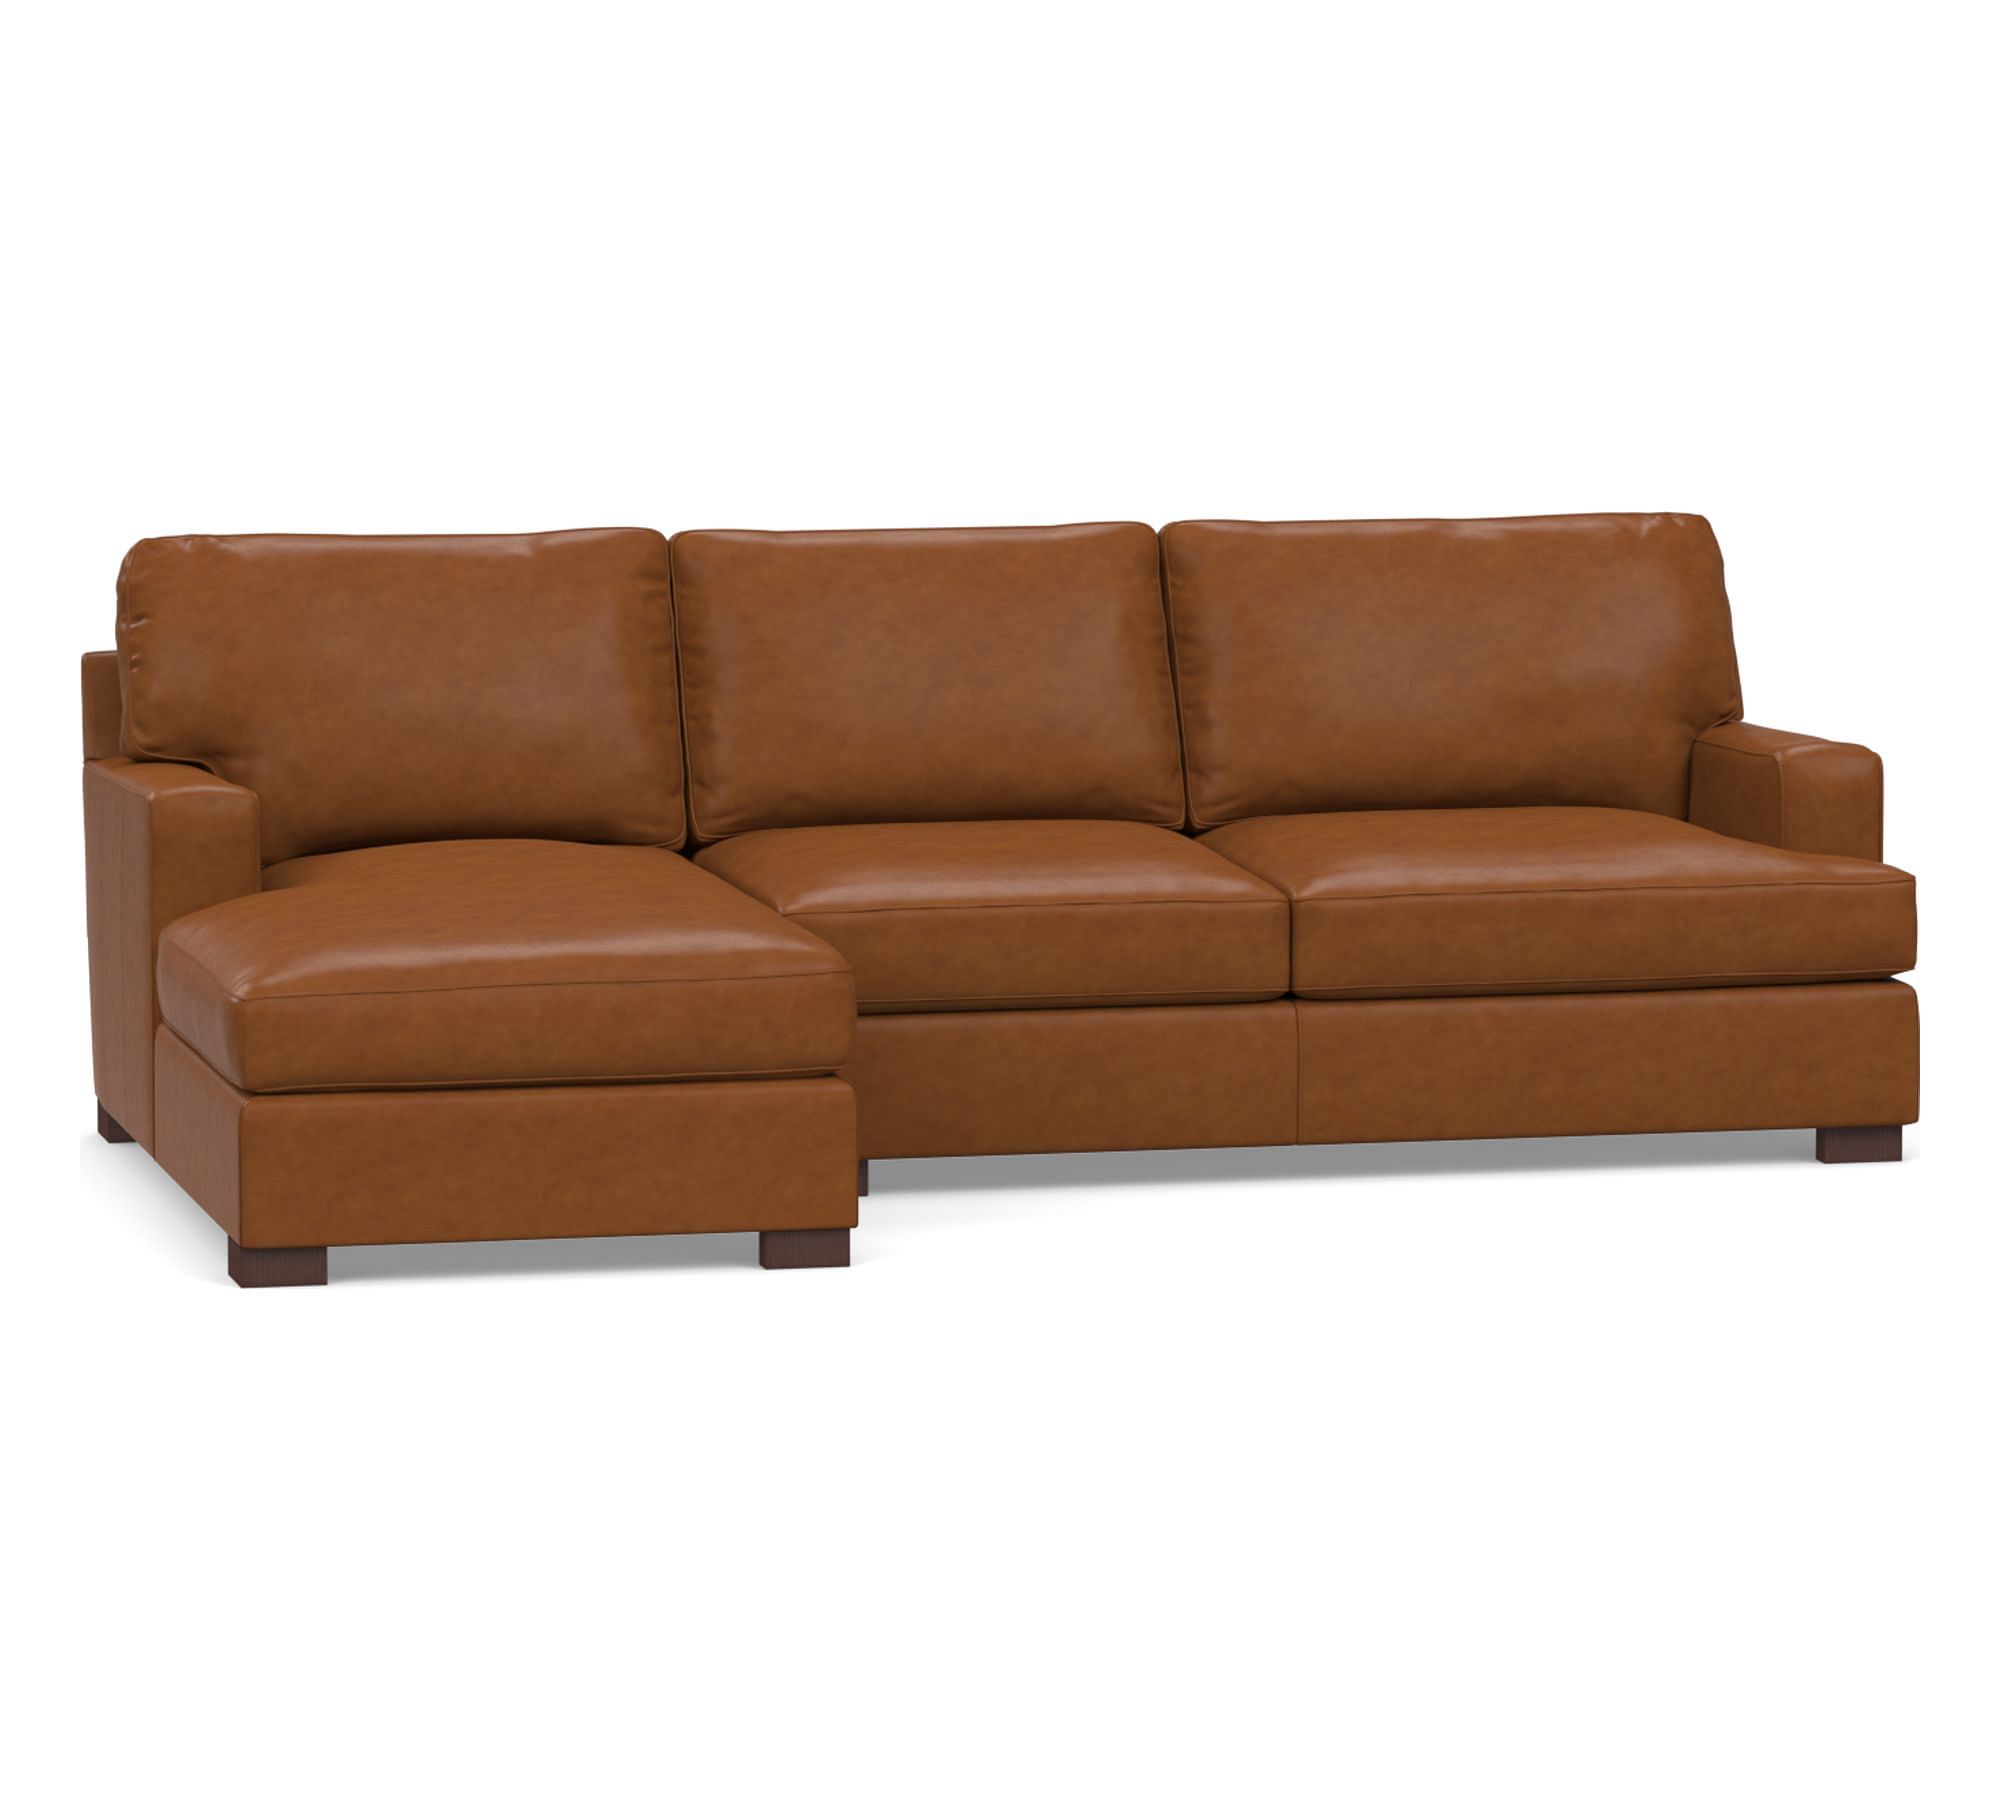 Townsend Square Arm Leather Chaise Sectional (108")